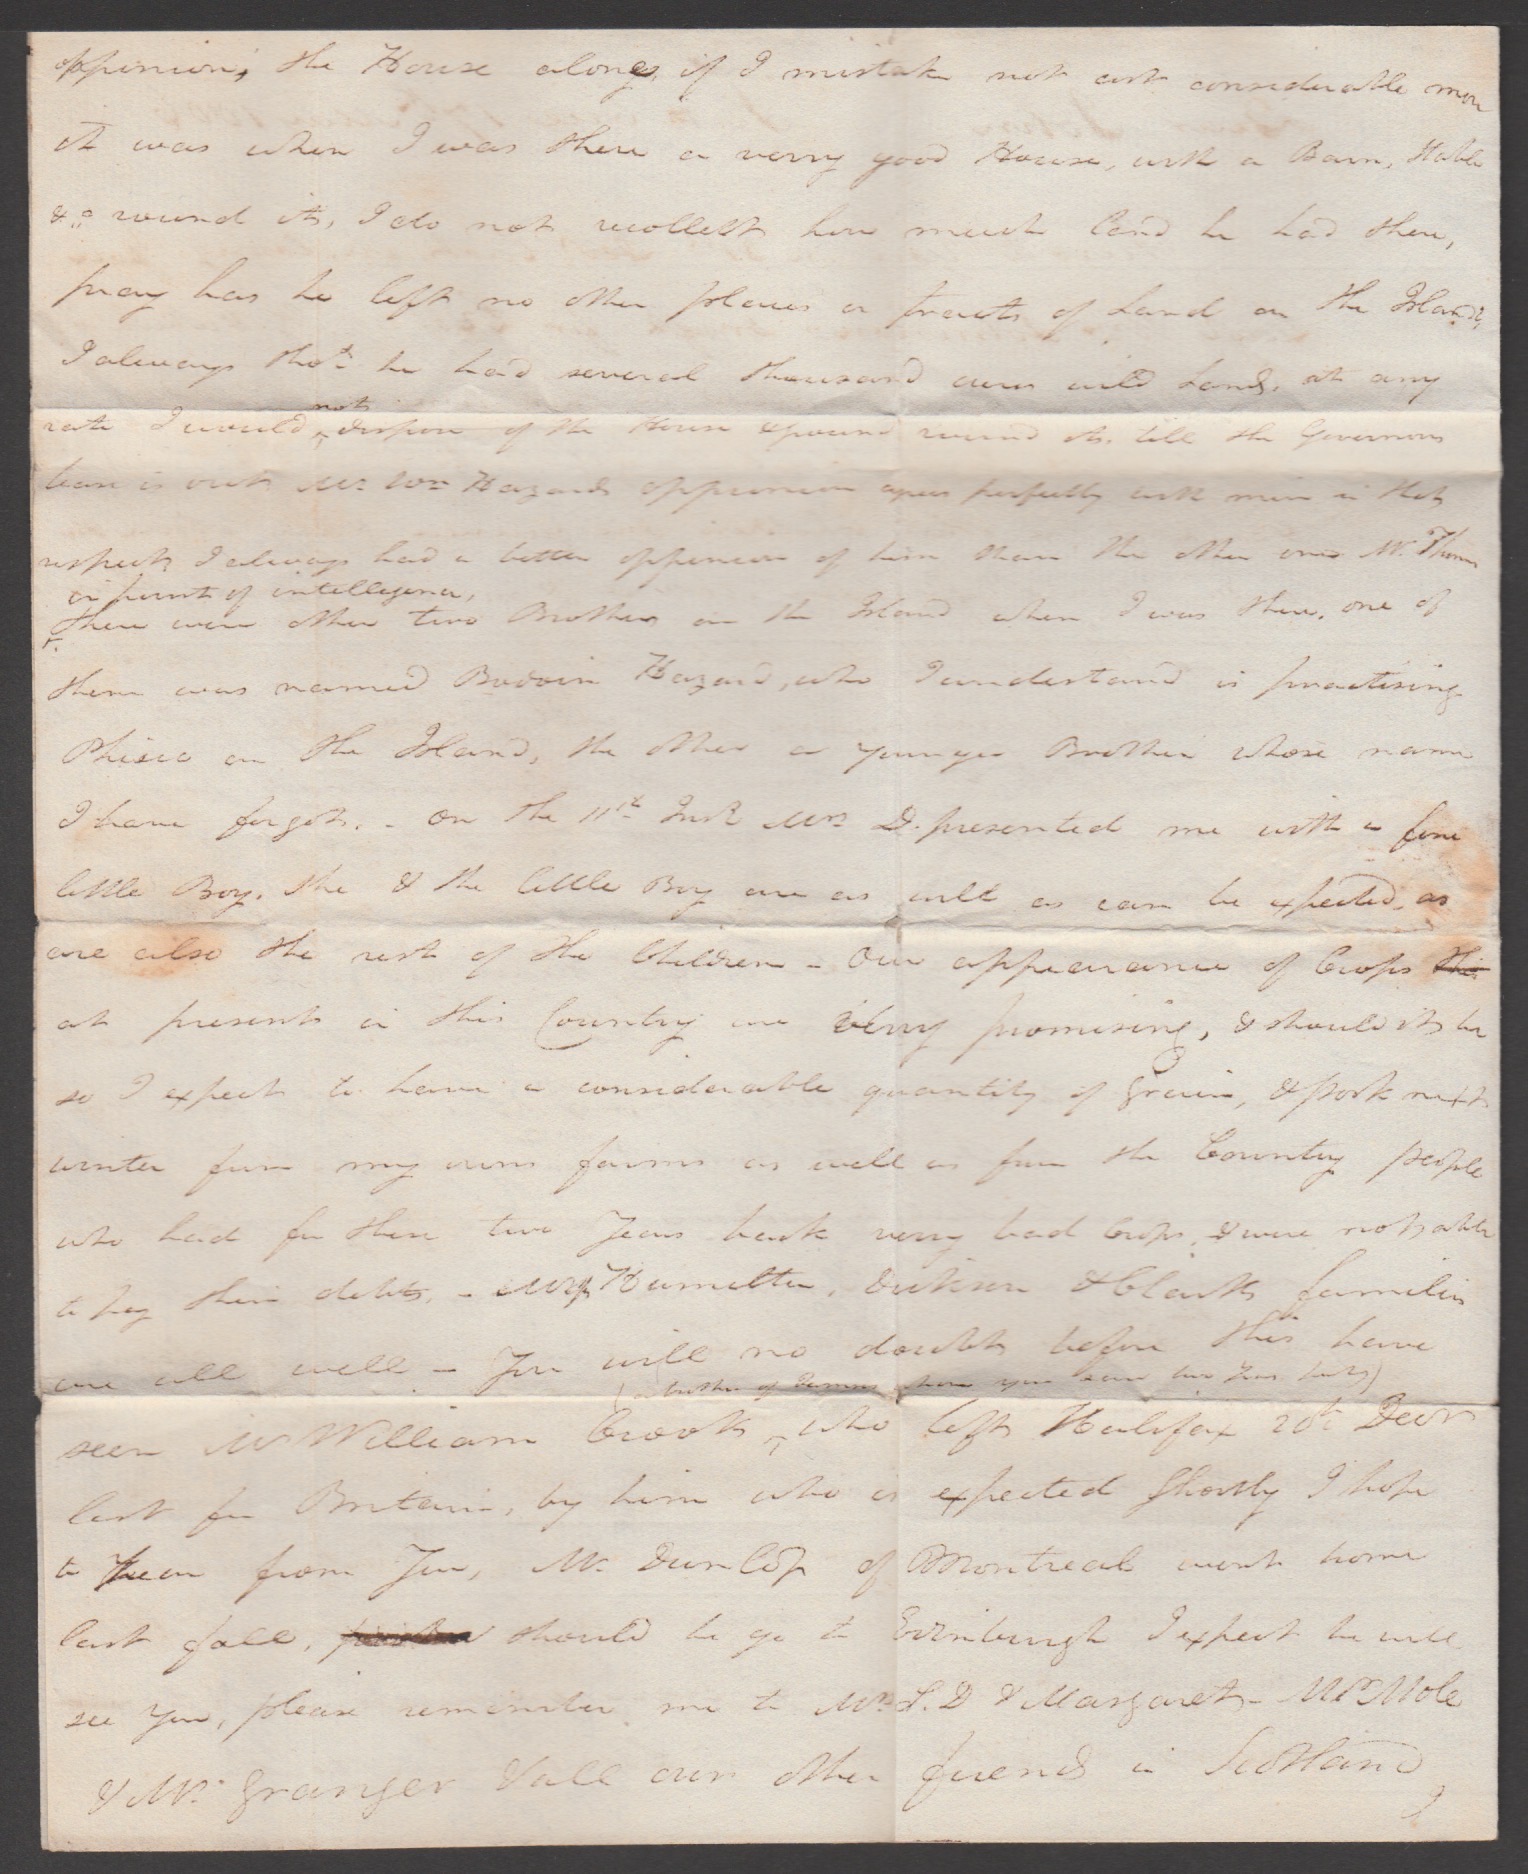 Canada 1806 Entire Letter From Fort Erie Carried By Forwarding Agent To New York Where It Was Put... - Image 4 of 7